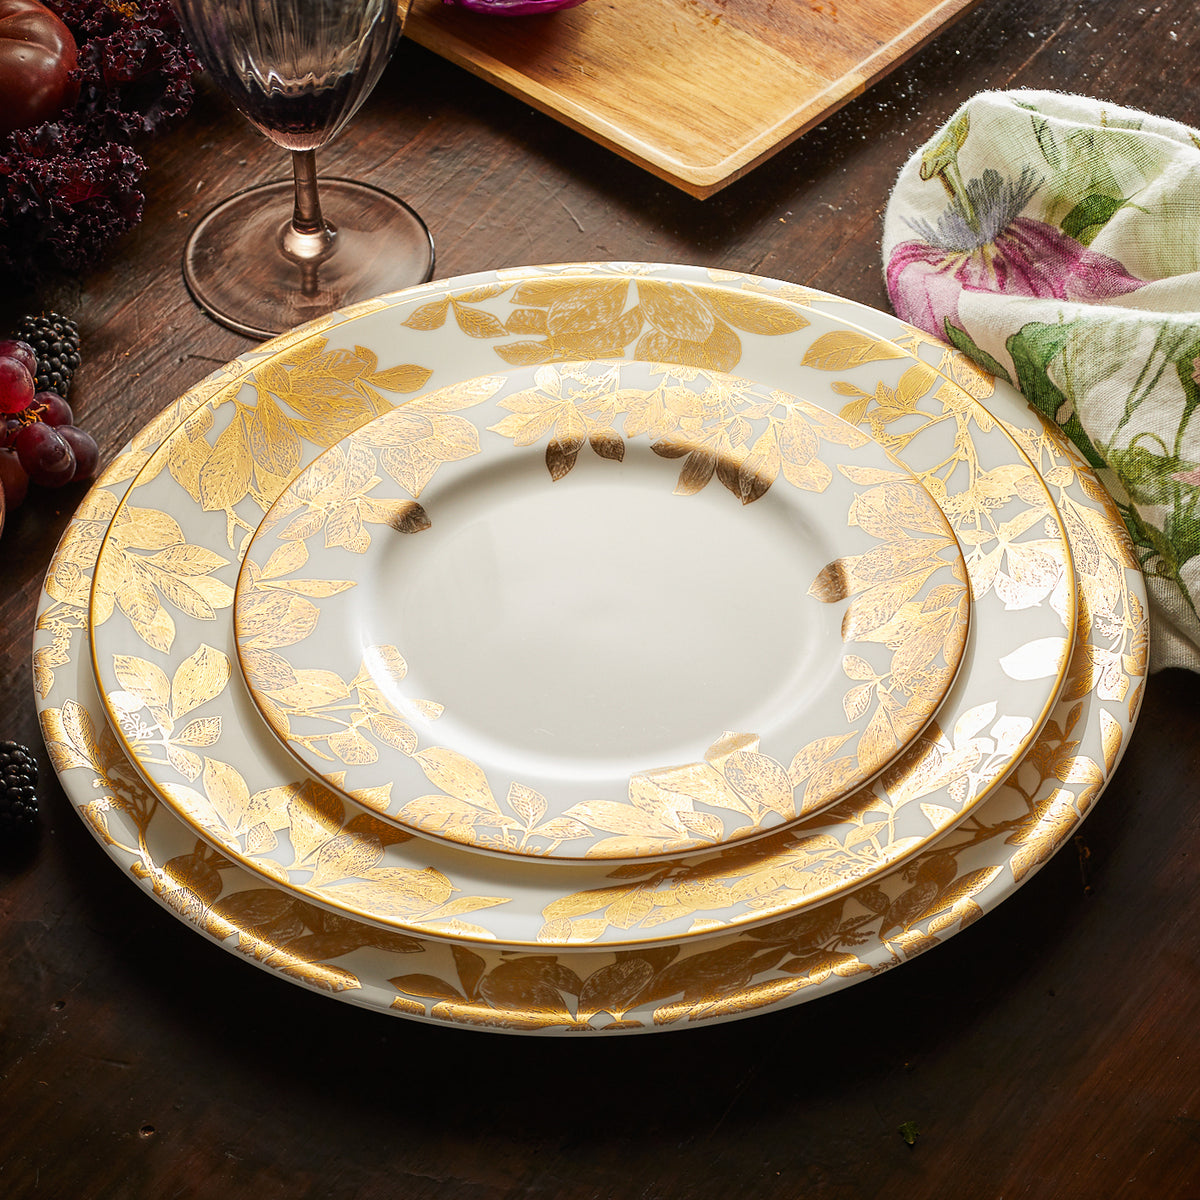 A set of Arbor Rimmed Charger Gold plates by Caskata Artisanal Home on a wooden table, perfect for elegant dining or special occasions.